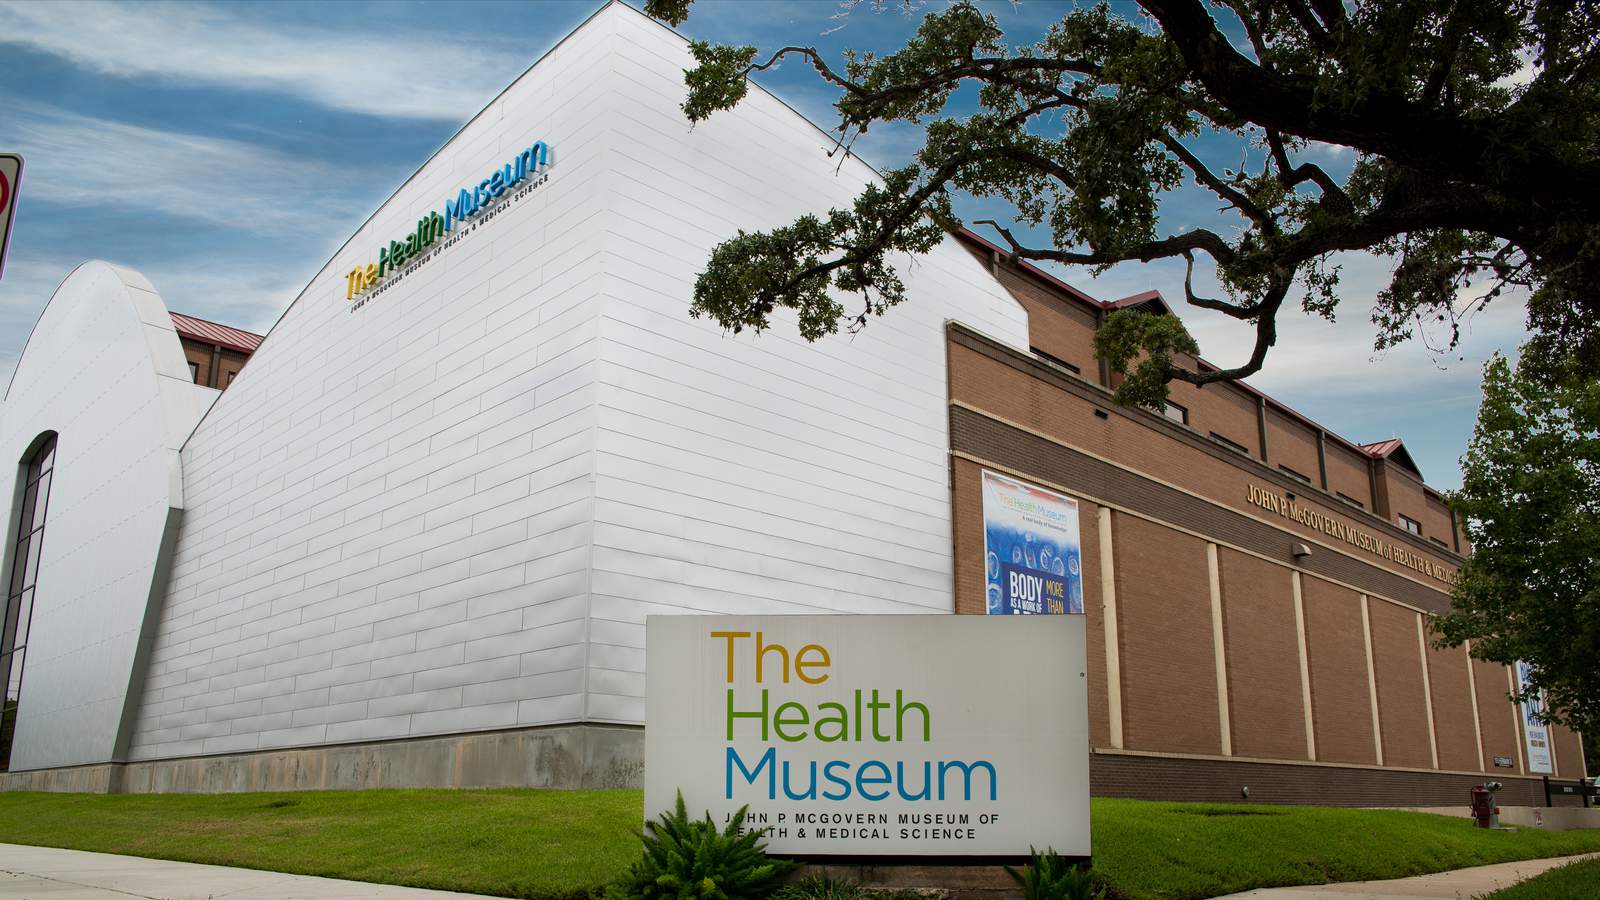 Here’s how some Houston families can score $3 tickets to The Health Museum